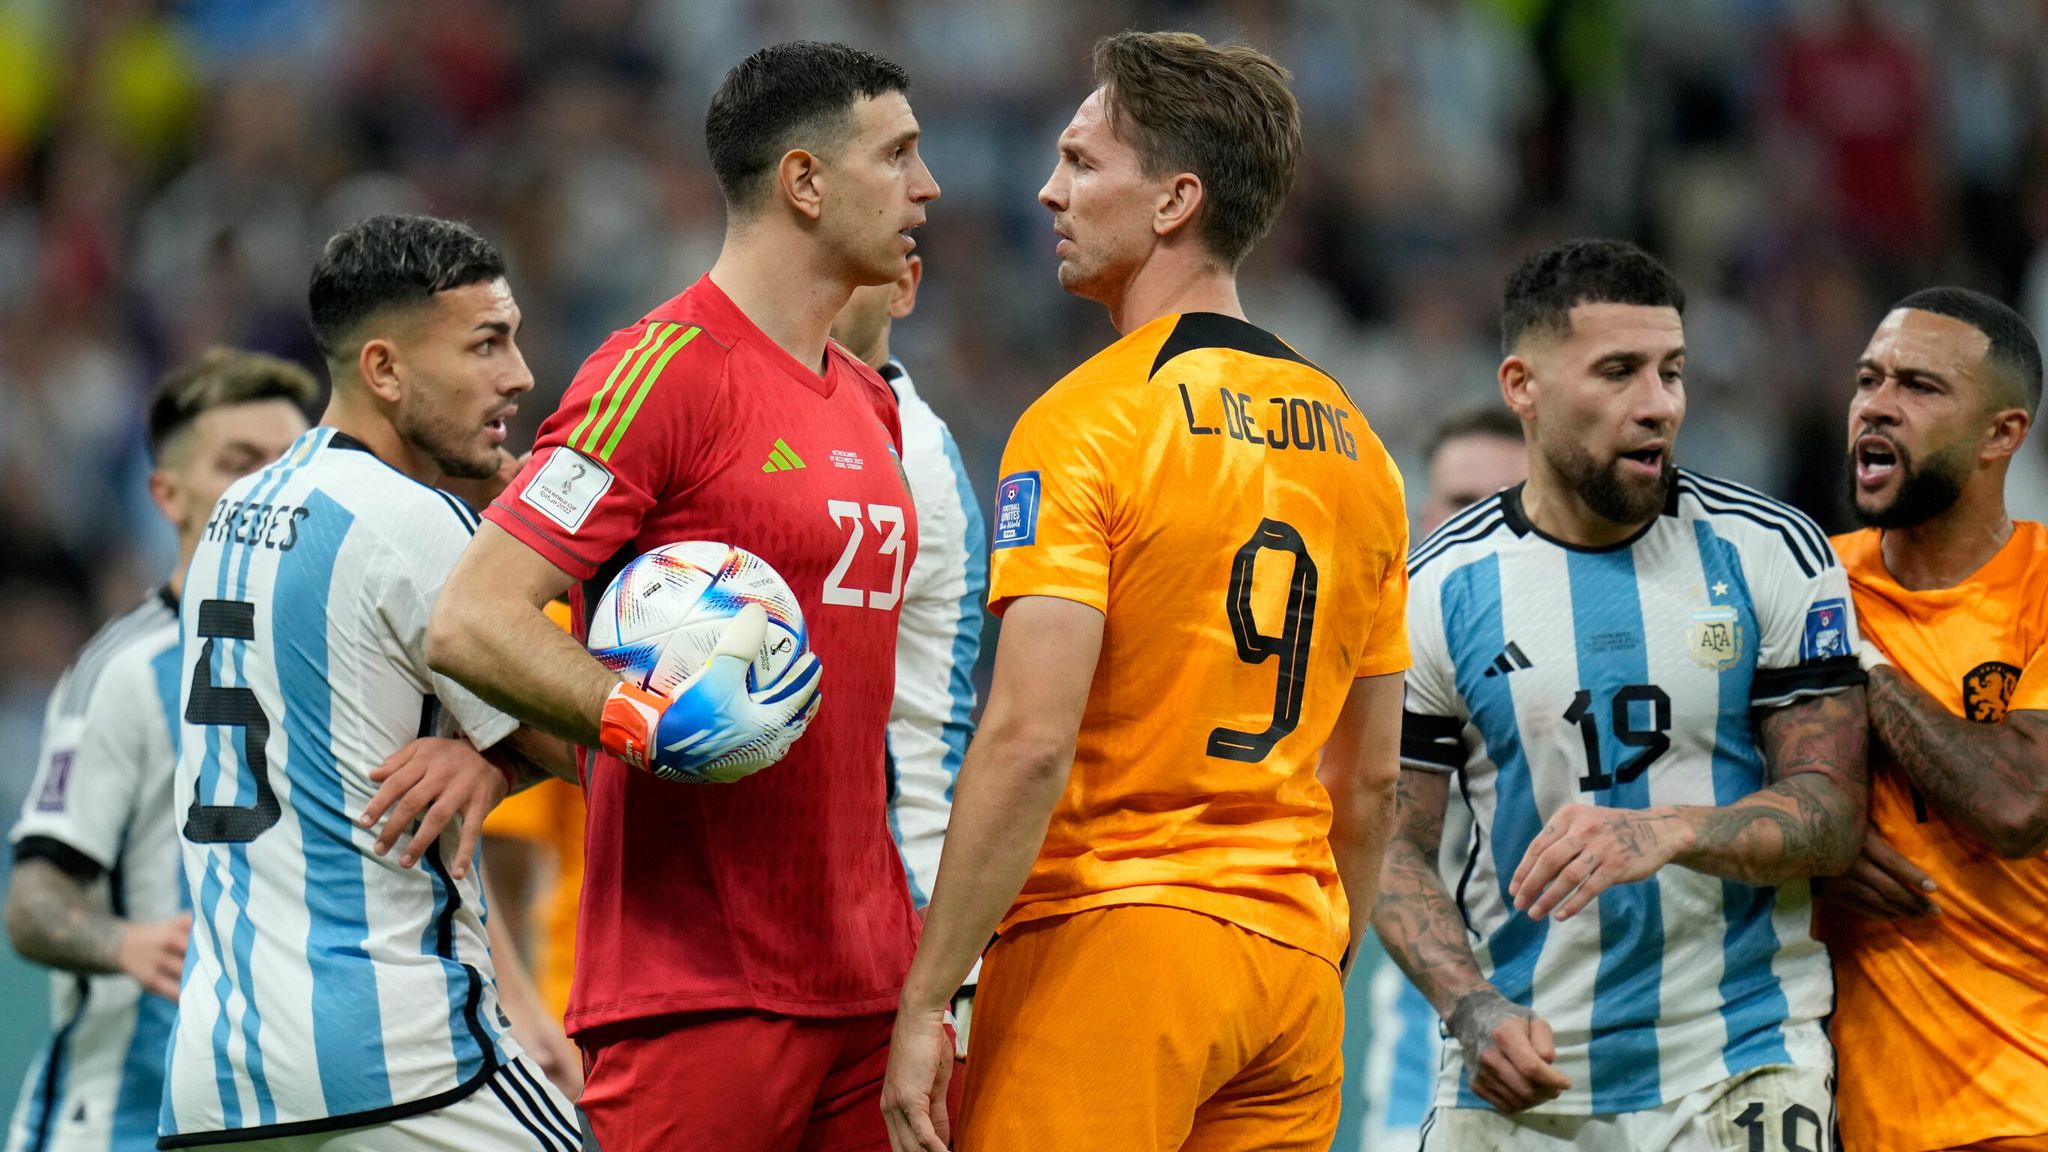 Photos: Messi's Argentina defeat Netherlands in shootout, In Pictures News